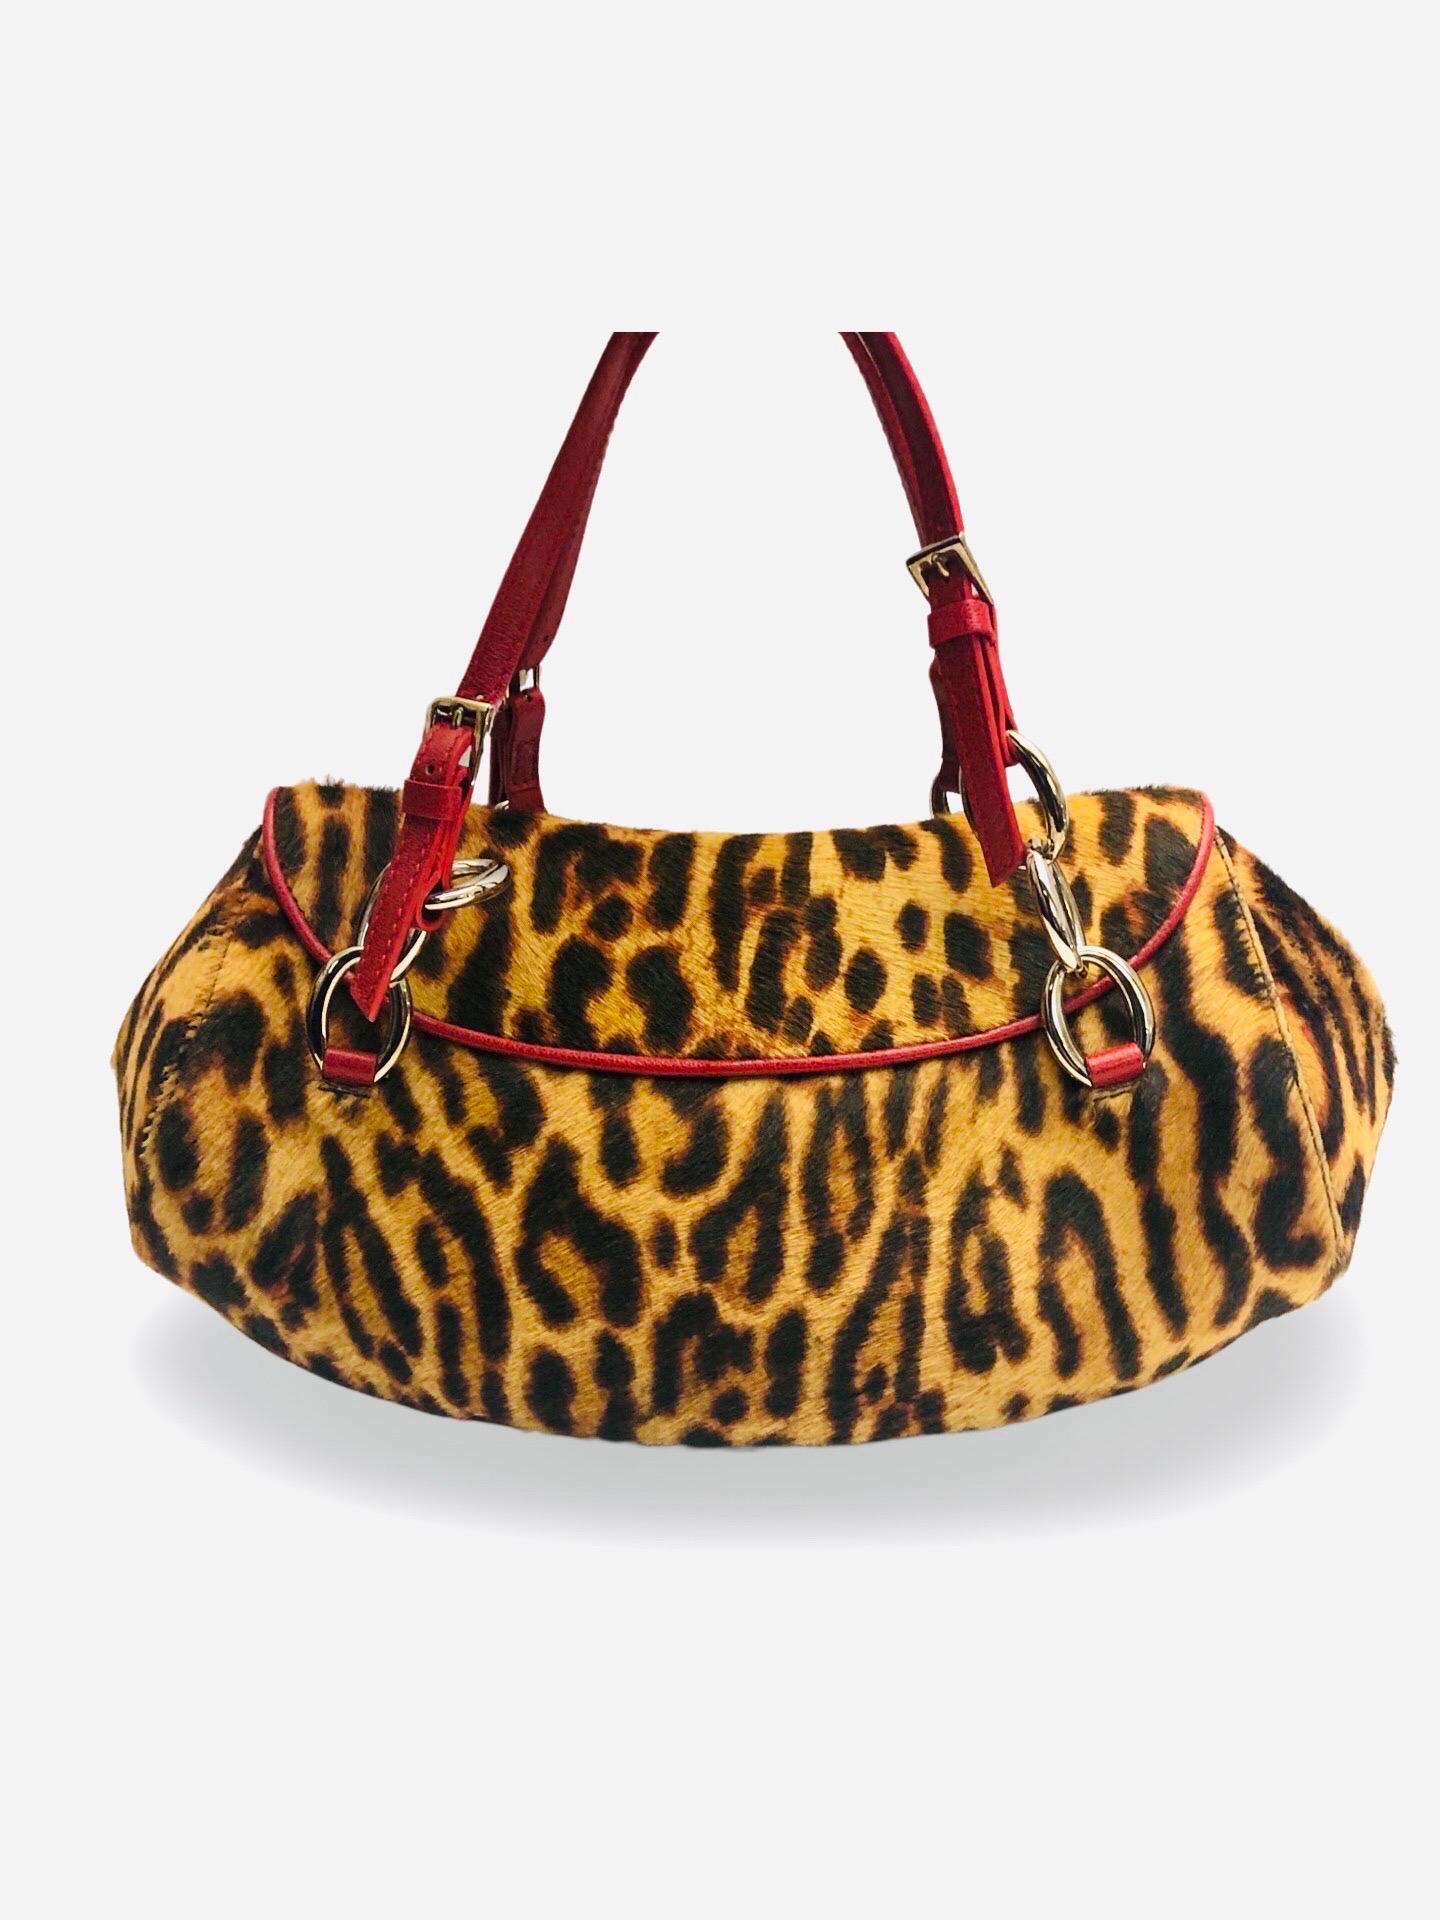  - Christian Dior medium sized leopard pattern horse hair handbag

- Featuring a red leather trim and red adjustable leather handles. Single flap closure, silver hardware throughout the bag. 

- A big silver toned hardware 